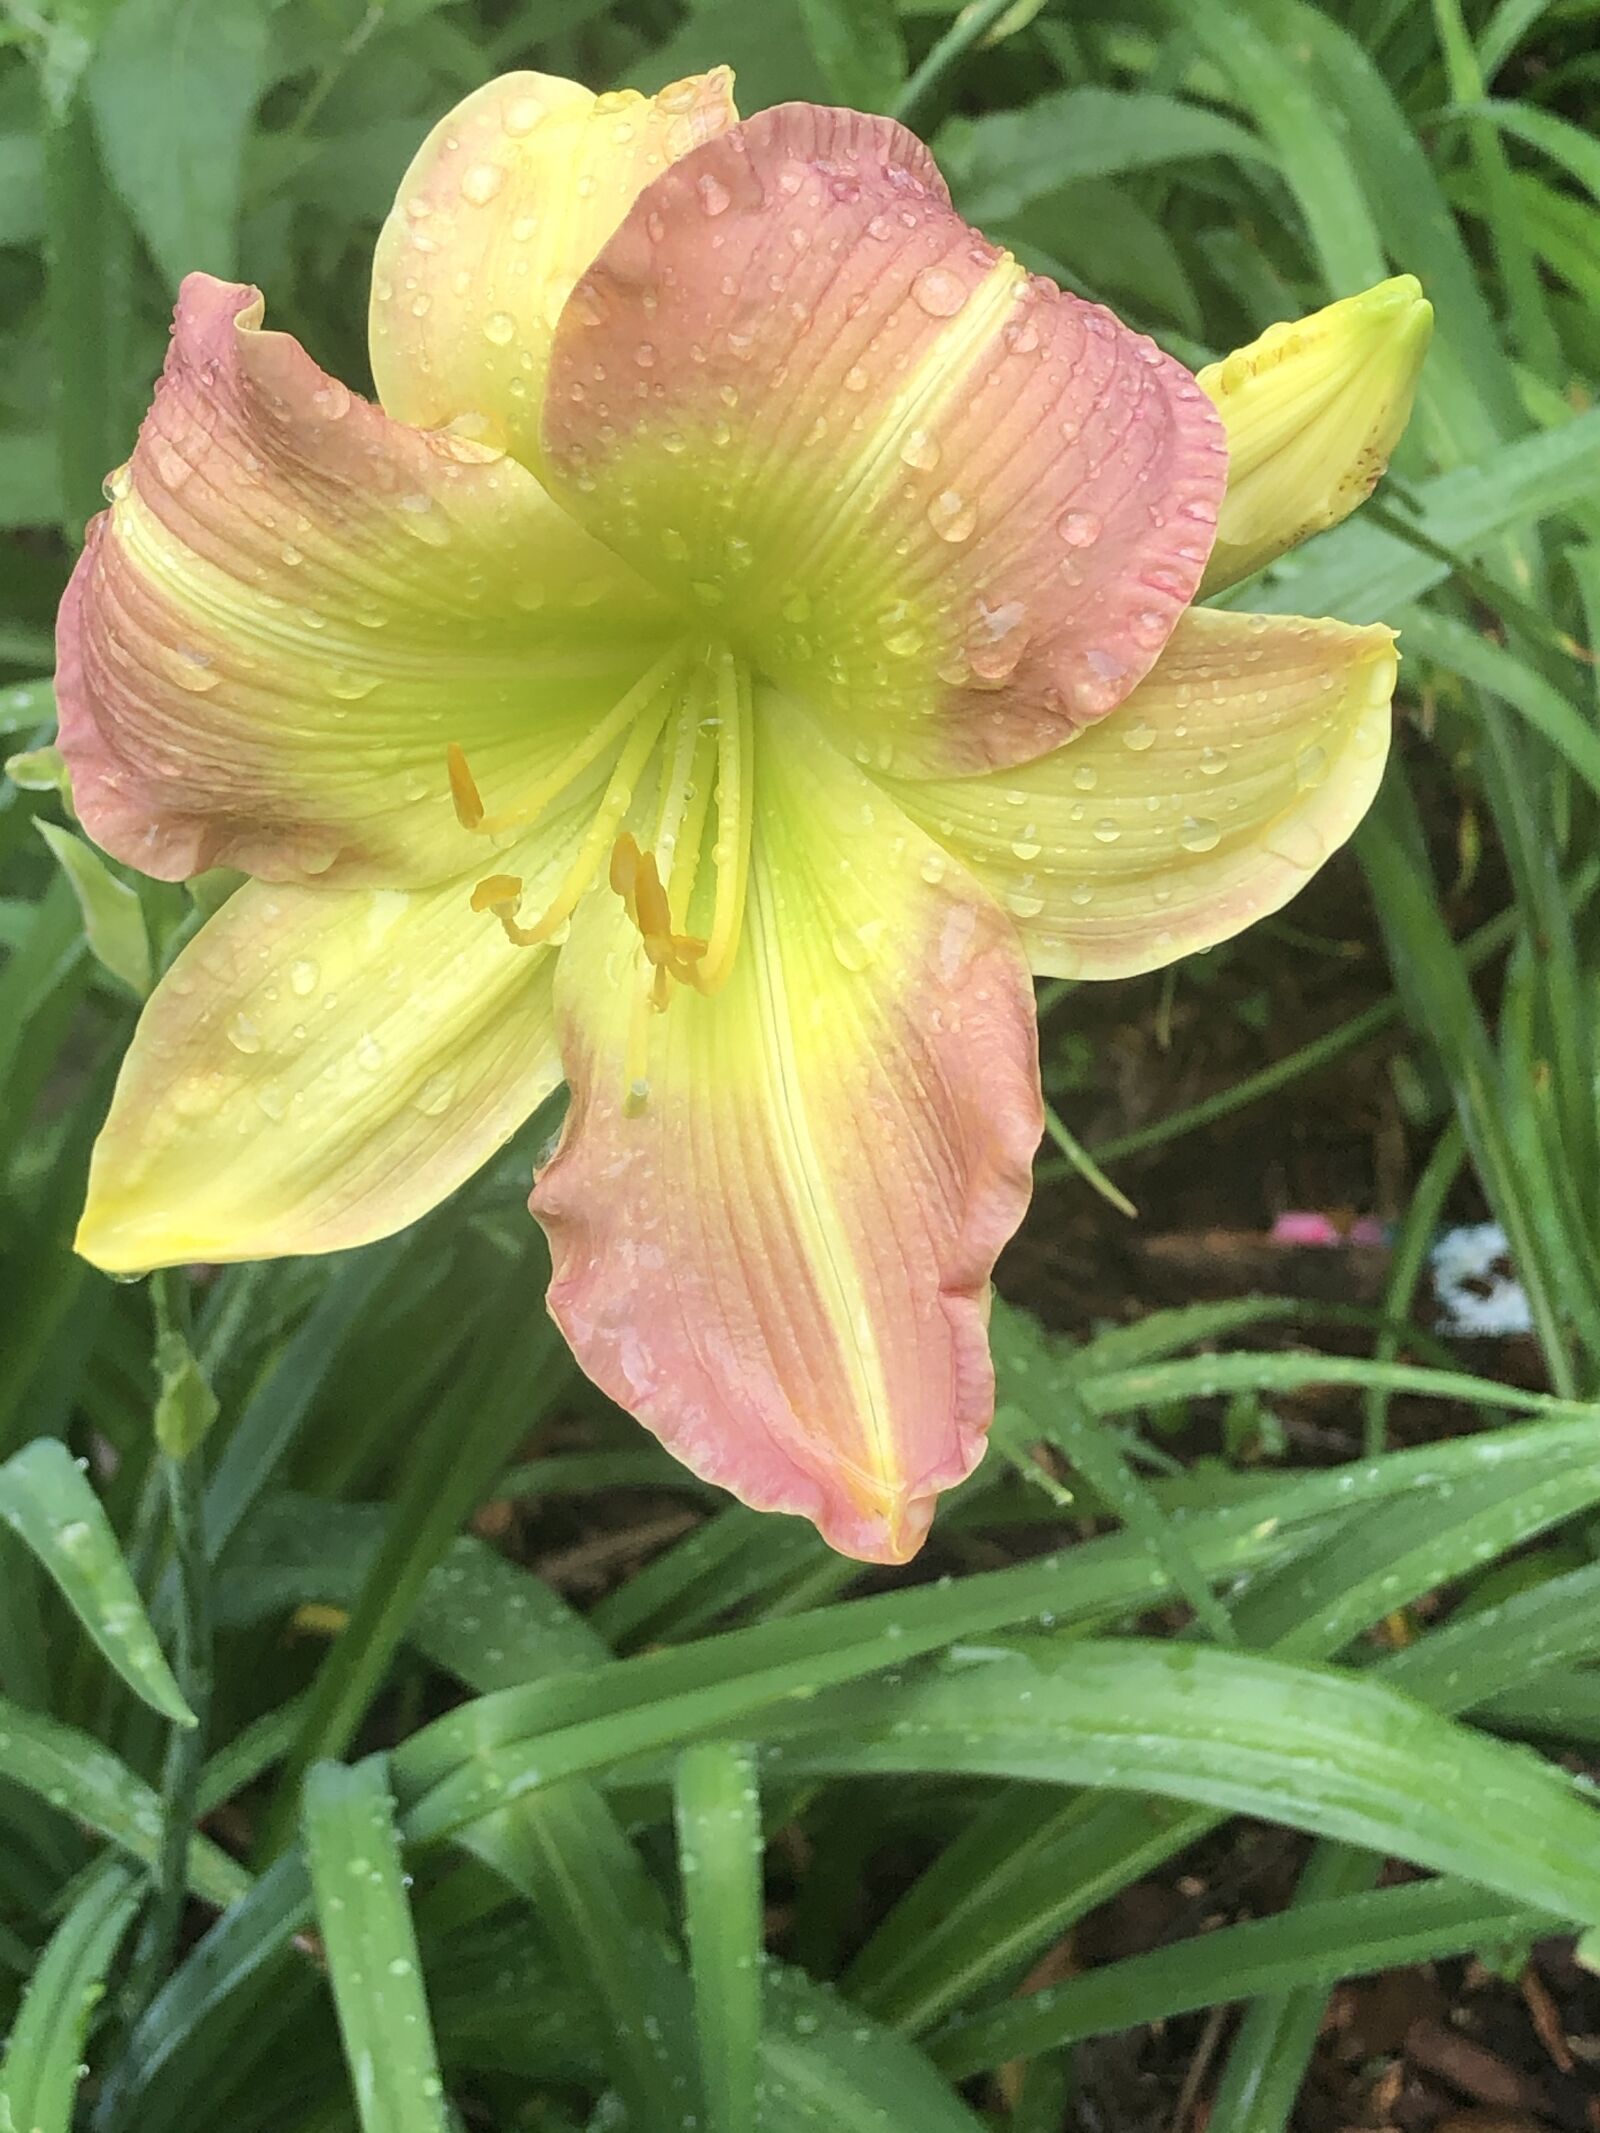 Apple iPhone 8 Plus + iPhone 8 Plus back dual camera 3.99mm f/1.8 sample photo. Day lily, green throat photography